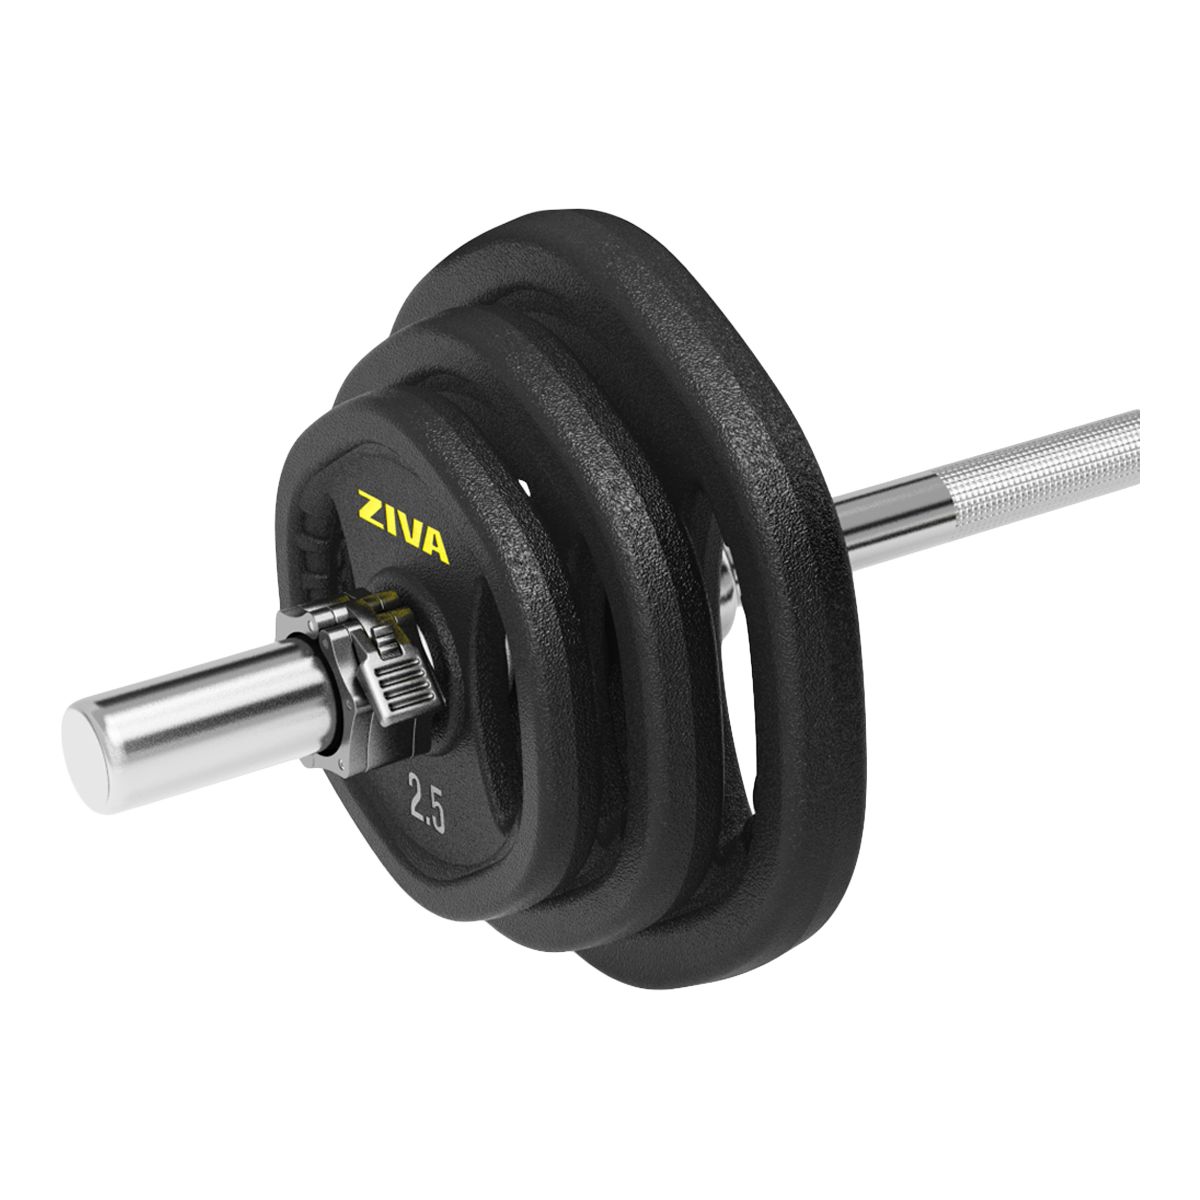 Ziva Performance lb Plate Set Weight Home Gym